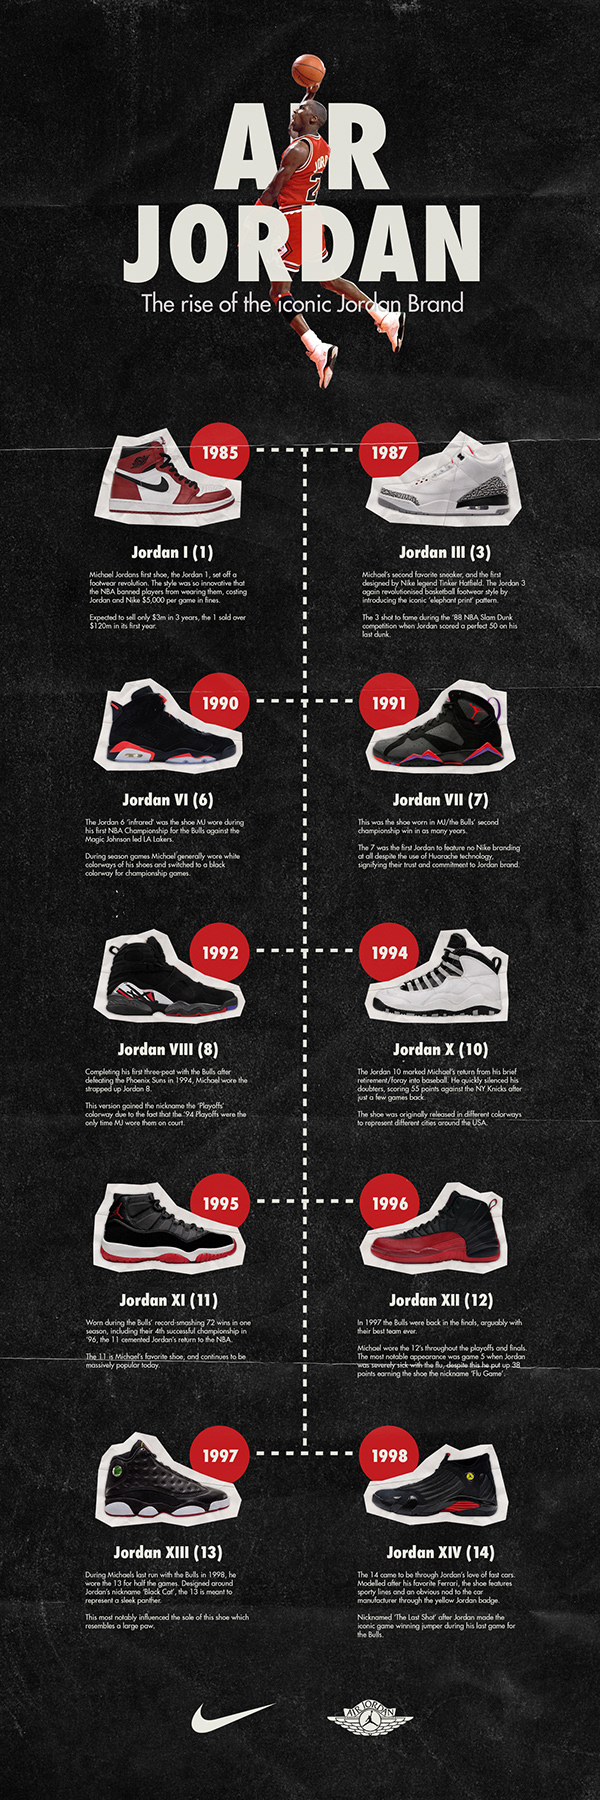 Air Jordan - The rise of the iconic brand